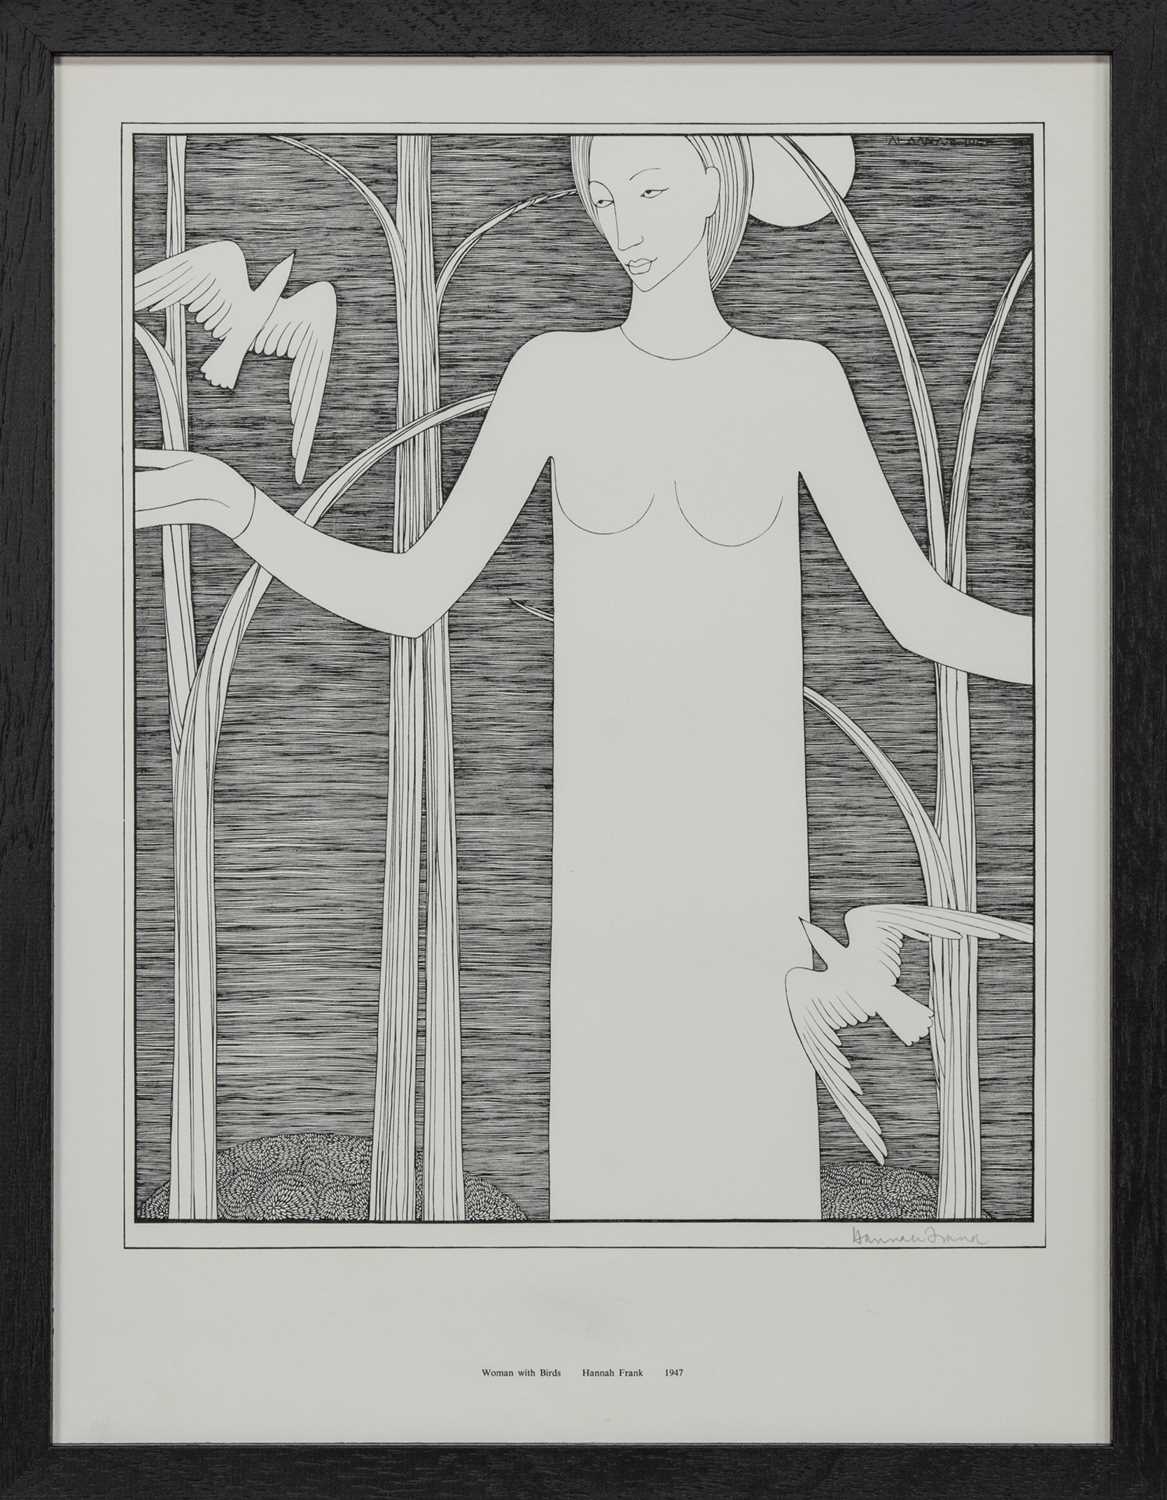 Lot 541 - WOMAN WITH BIRDS, A LITHOGRAPH BY HANNAH FRANK